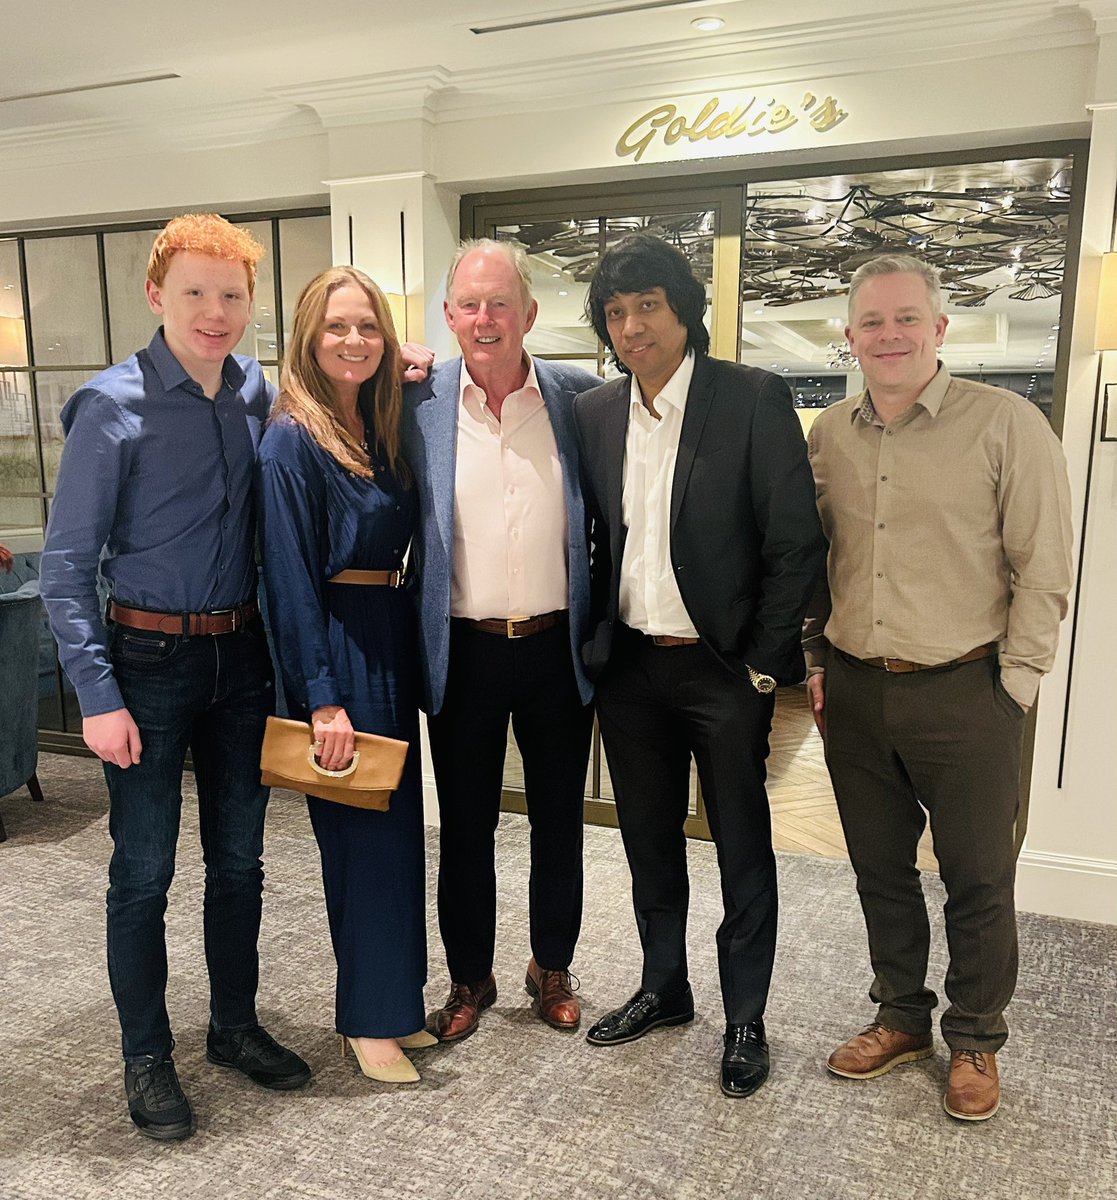 A wonderful evening last night in #Liverpool meeting the AMAZING people behind @stevemorganfdn Learning about #TypeDiabetesGrandChallenge;exciting research @JDRFUK @DiabetesUK & giving some tips Some fab stories of life, leadership,football & sliding doors #HopeBurnsEternal 🙏🏽